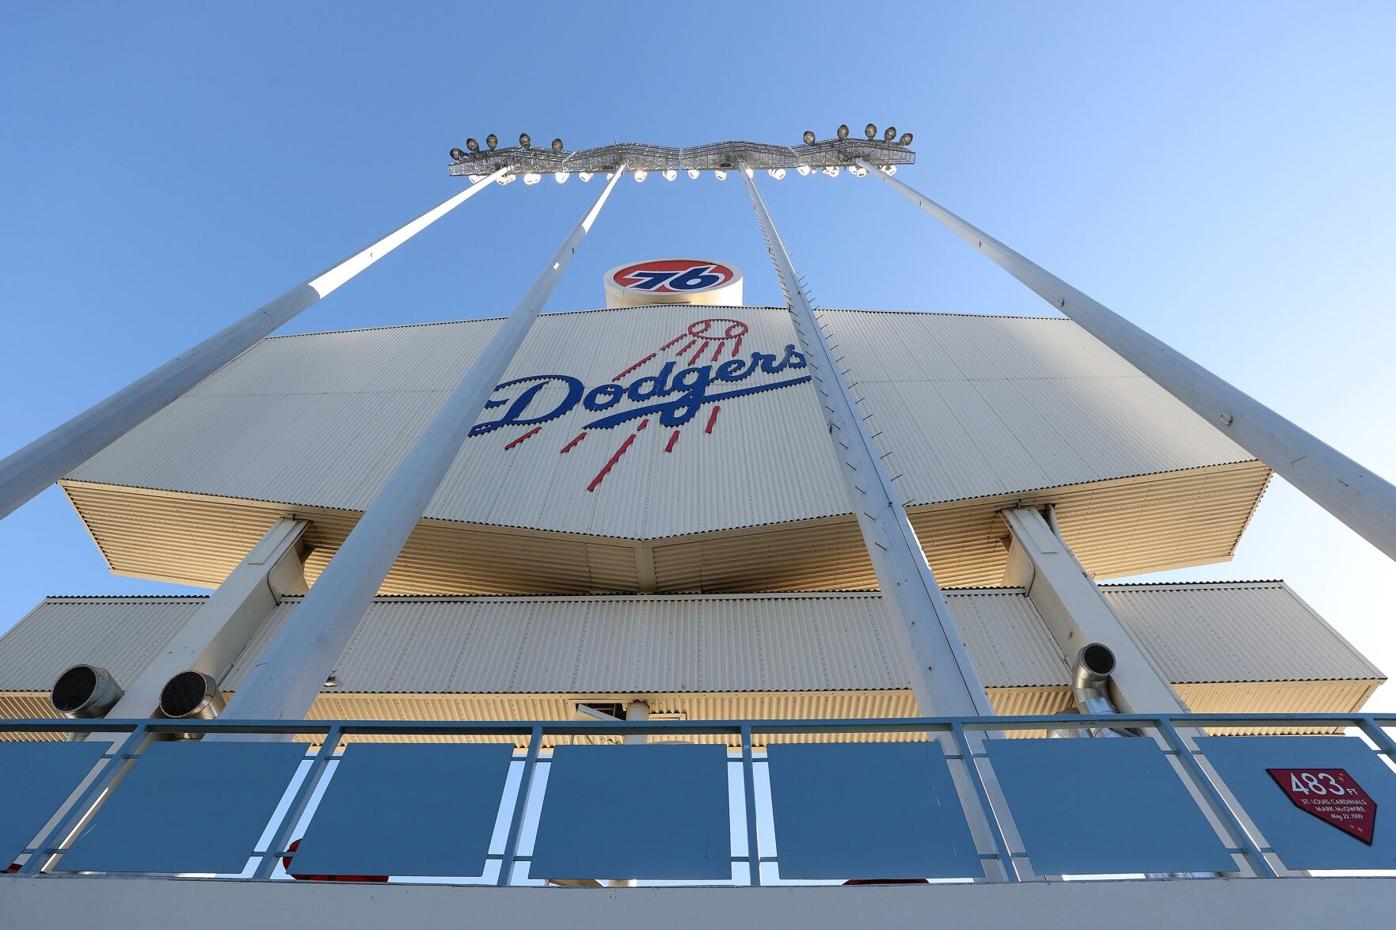 Dodgers to host seventh annual LGBT Night May 31 at Dodger Stadium